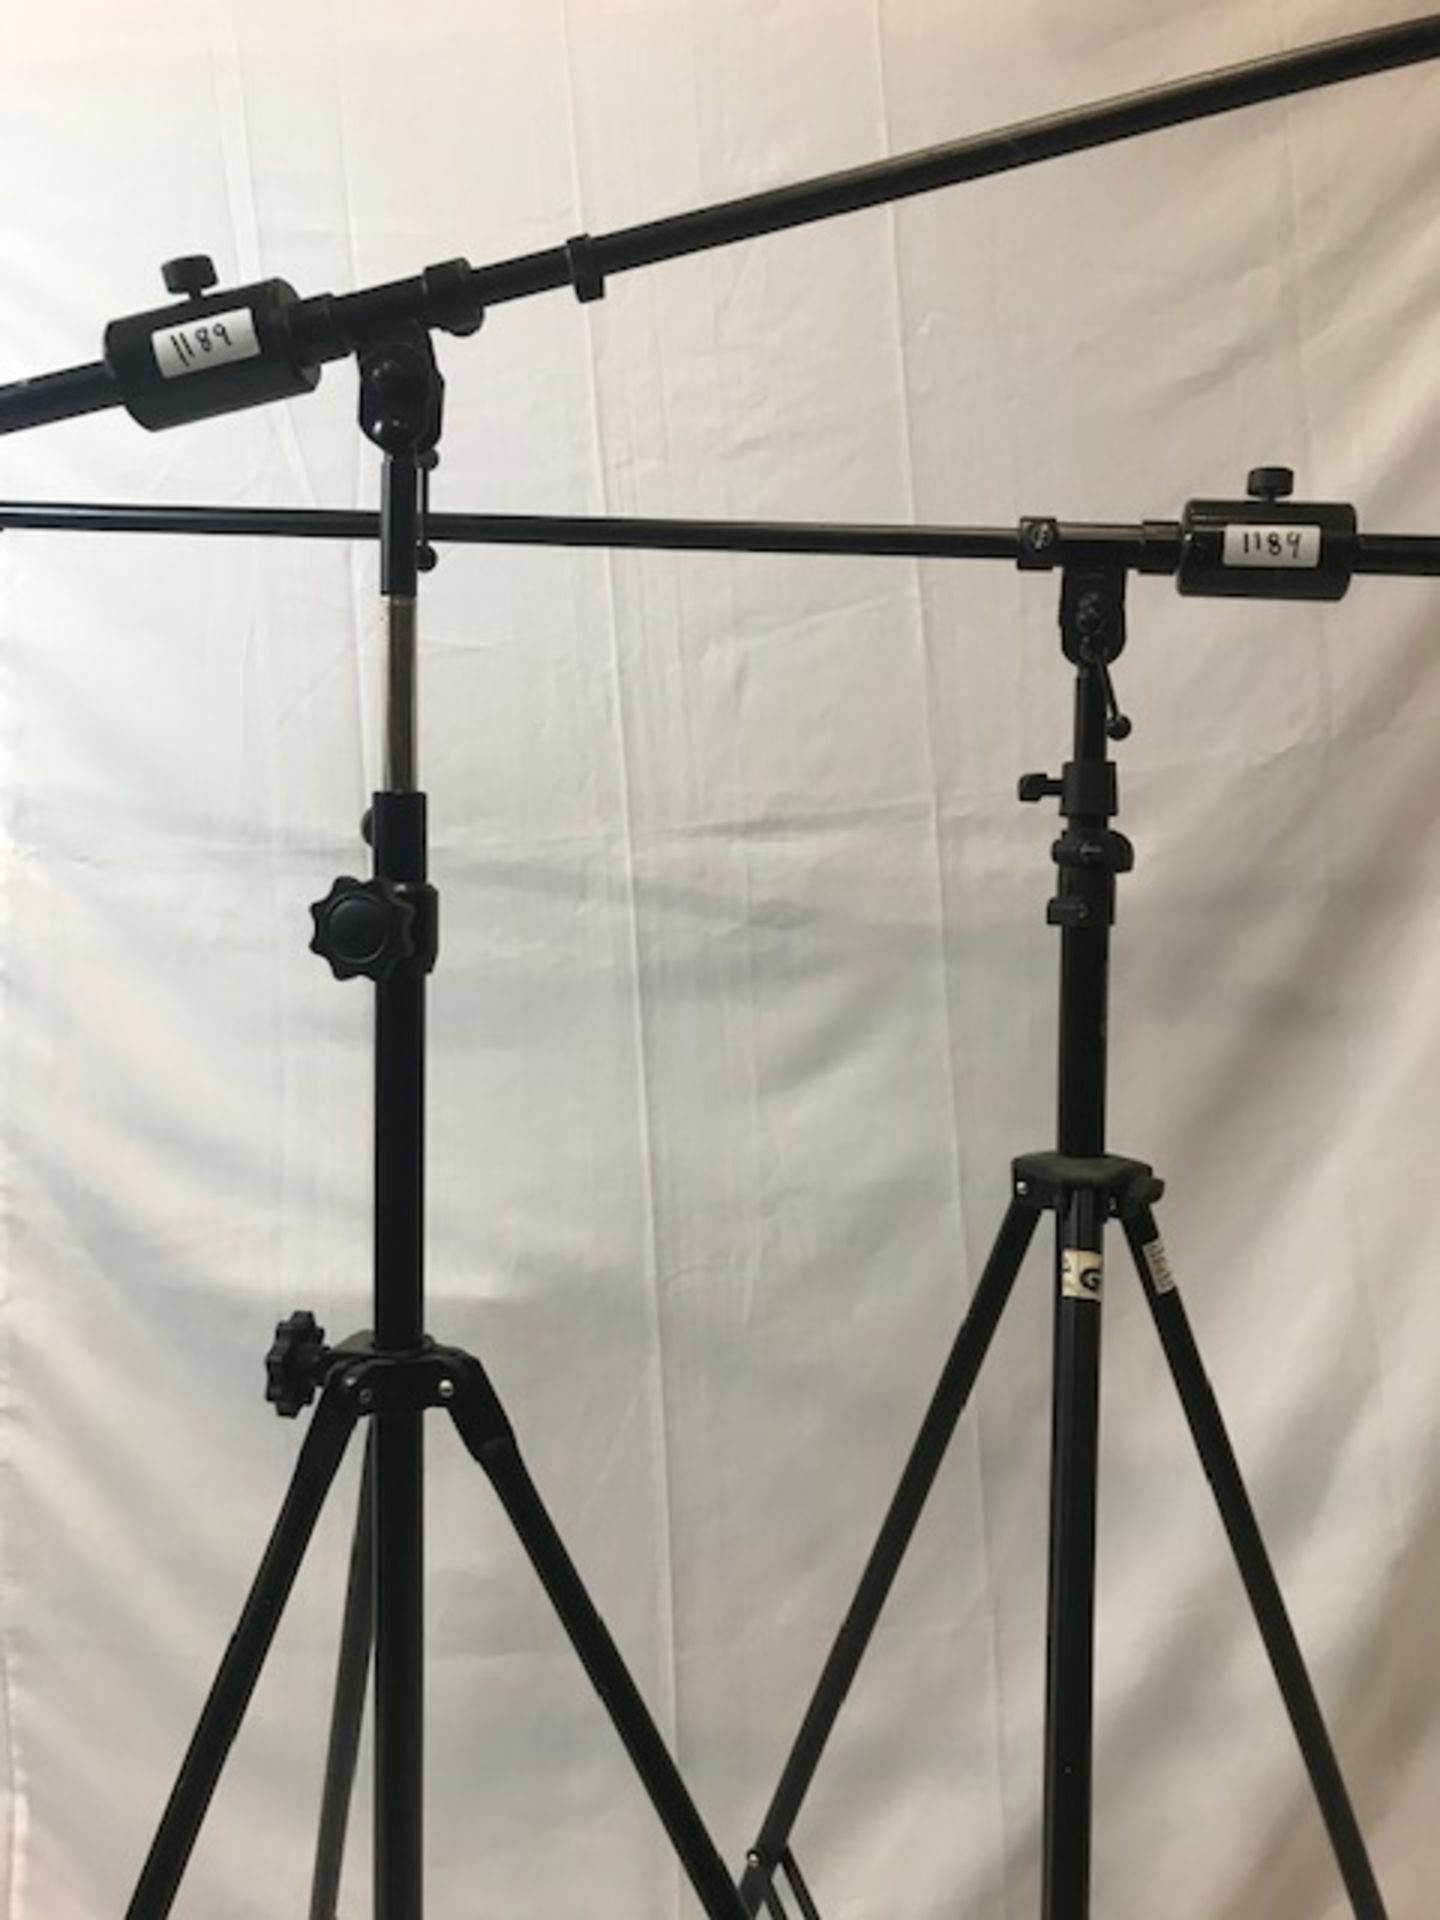 1 x Pair of K&M heavy duty overhead mic stands - Ref: 1189 - CL581 - Location: Altrincham WA14 - Image 2 of 2